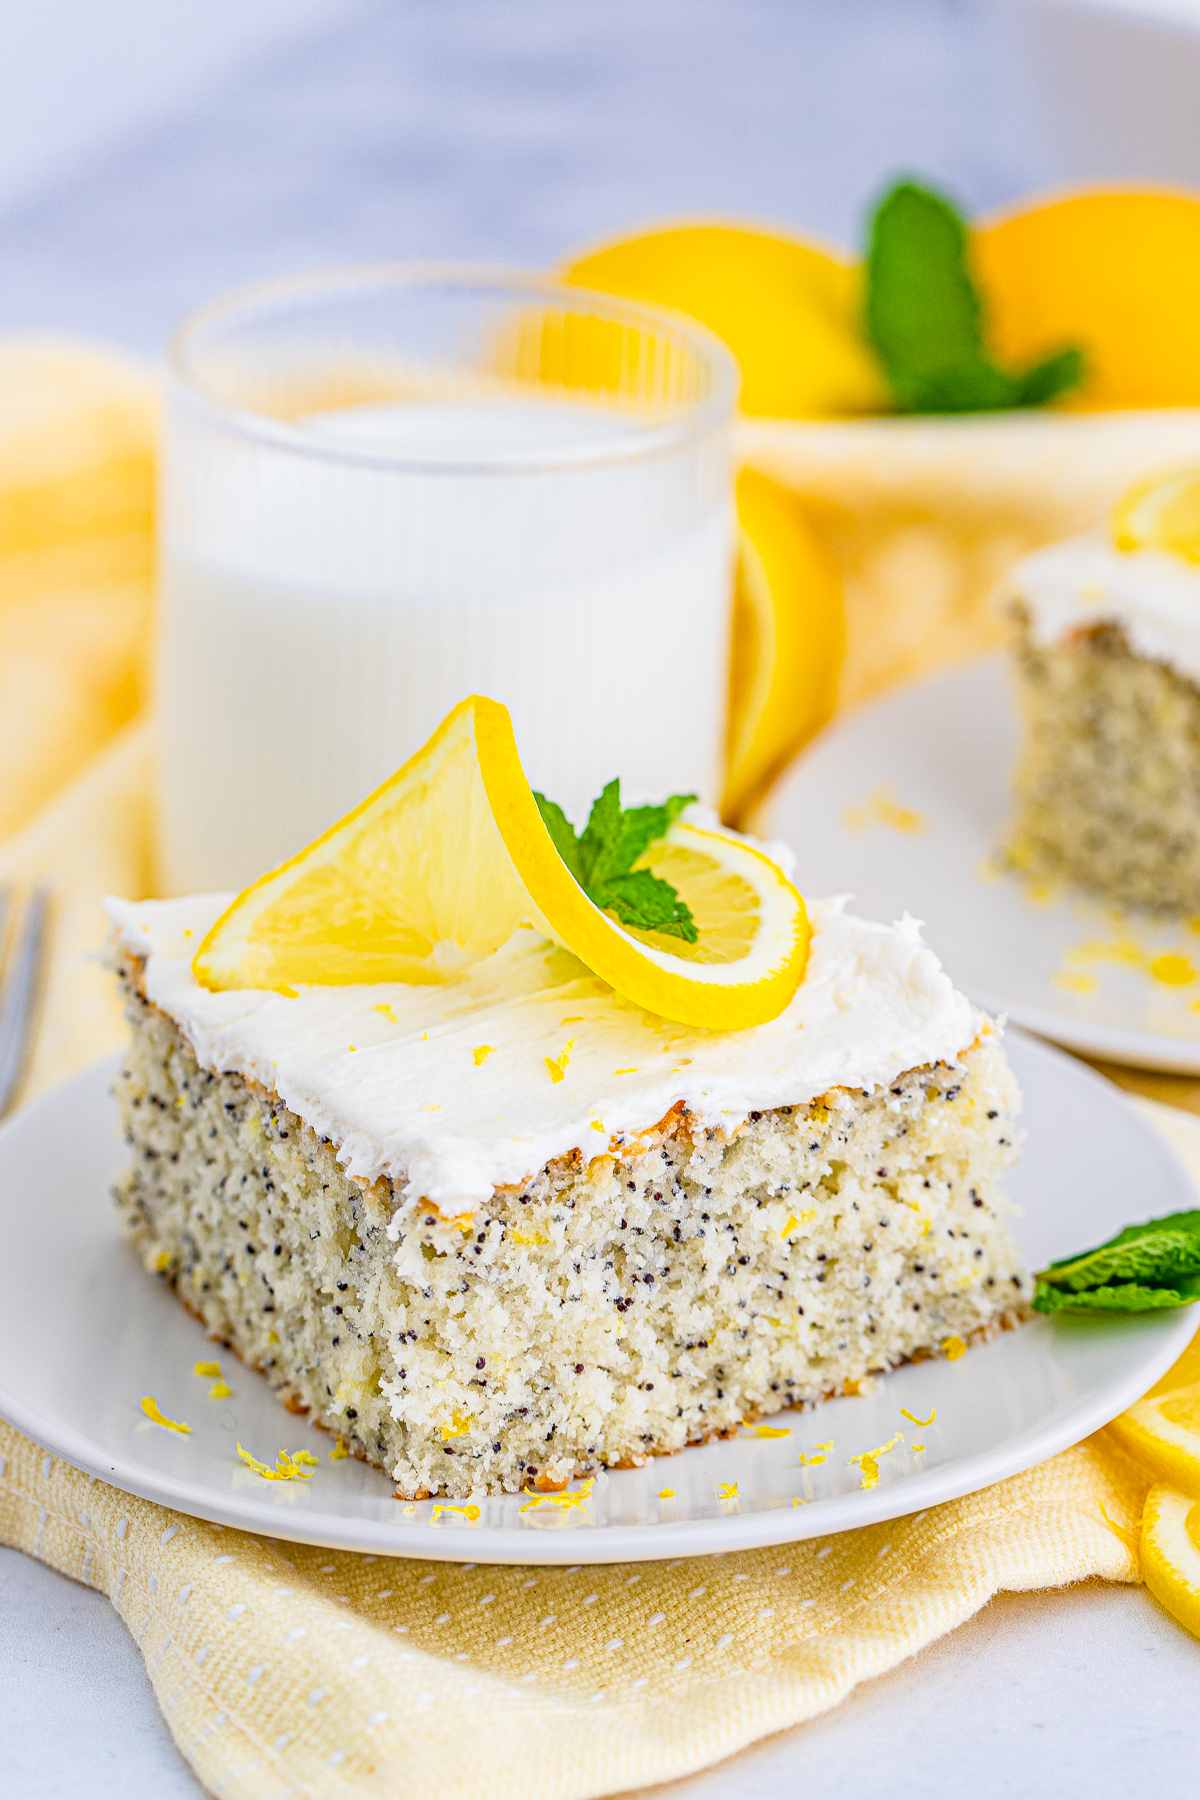 Lemon Poppy Seed Cake slice on white plate topped with lemon and mint